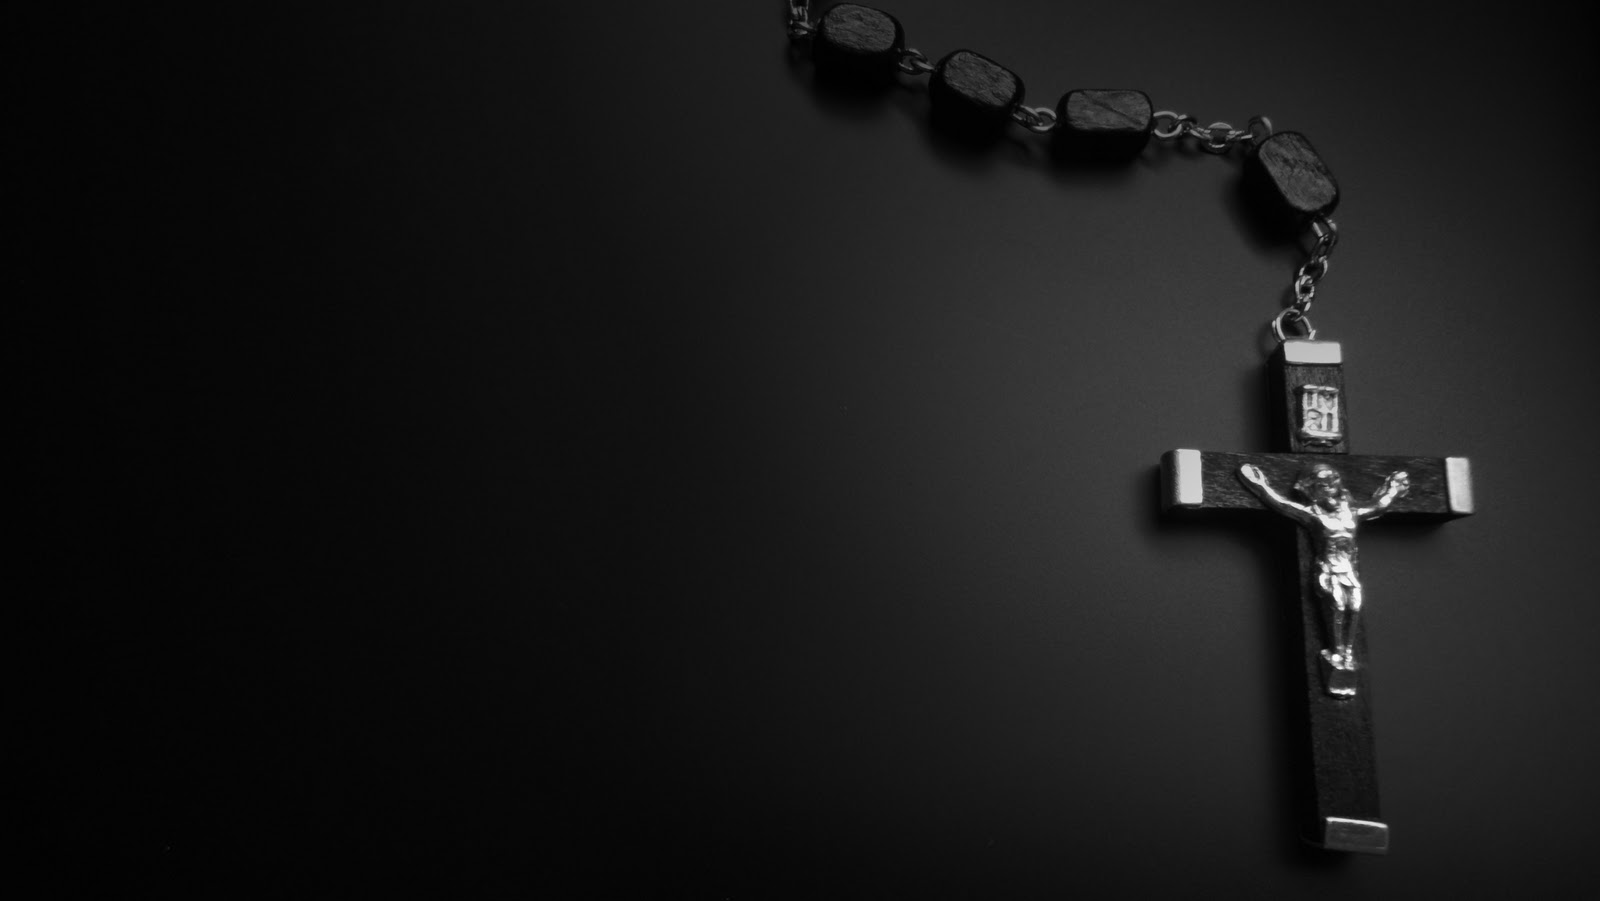  Pagan Philosopher Rosary Beads wallpaper   The history of beads